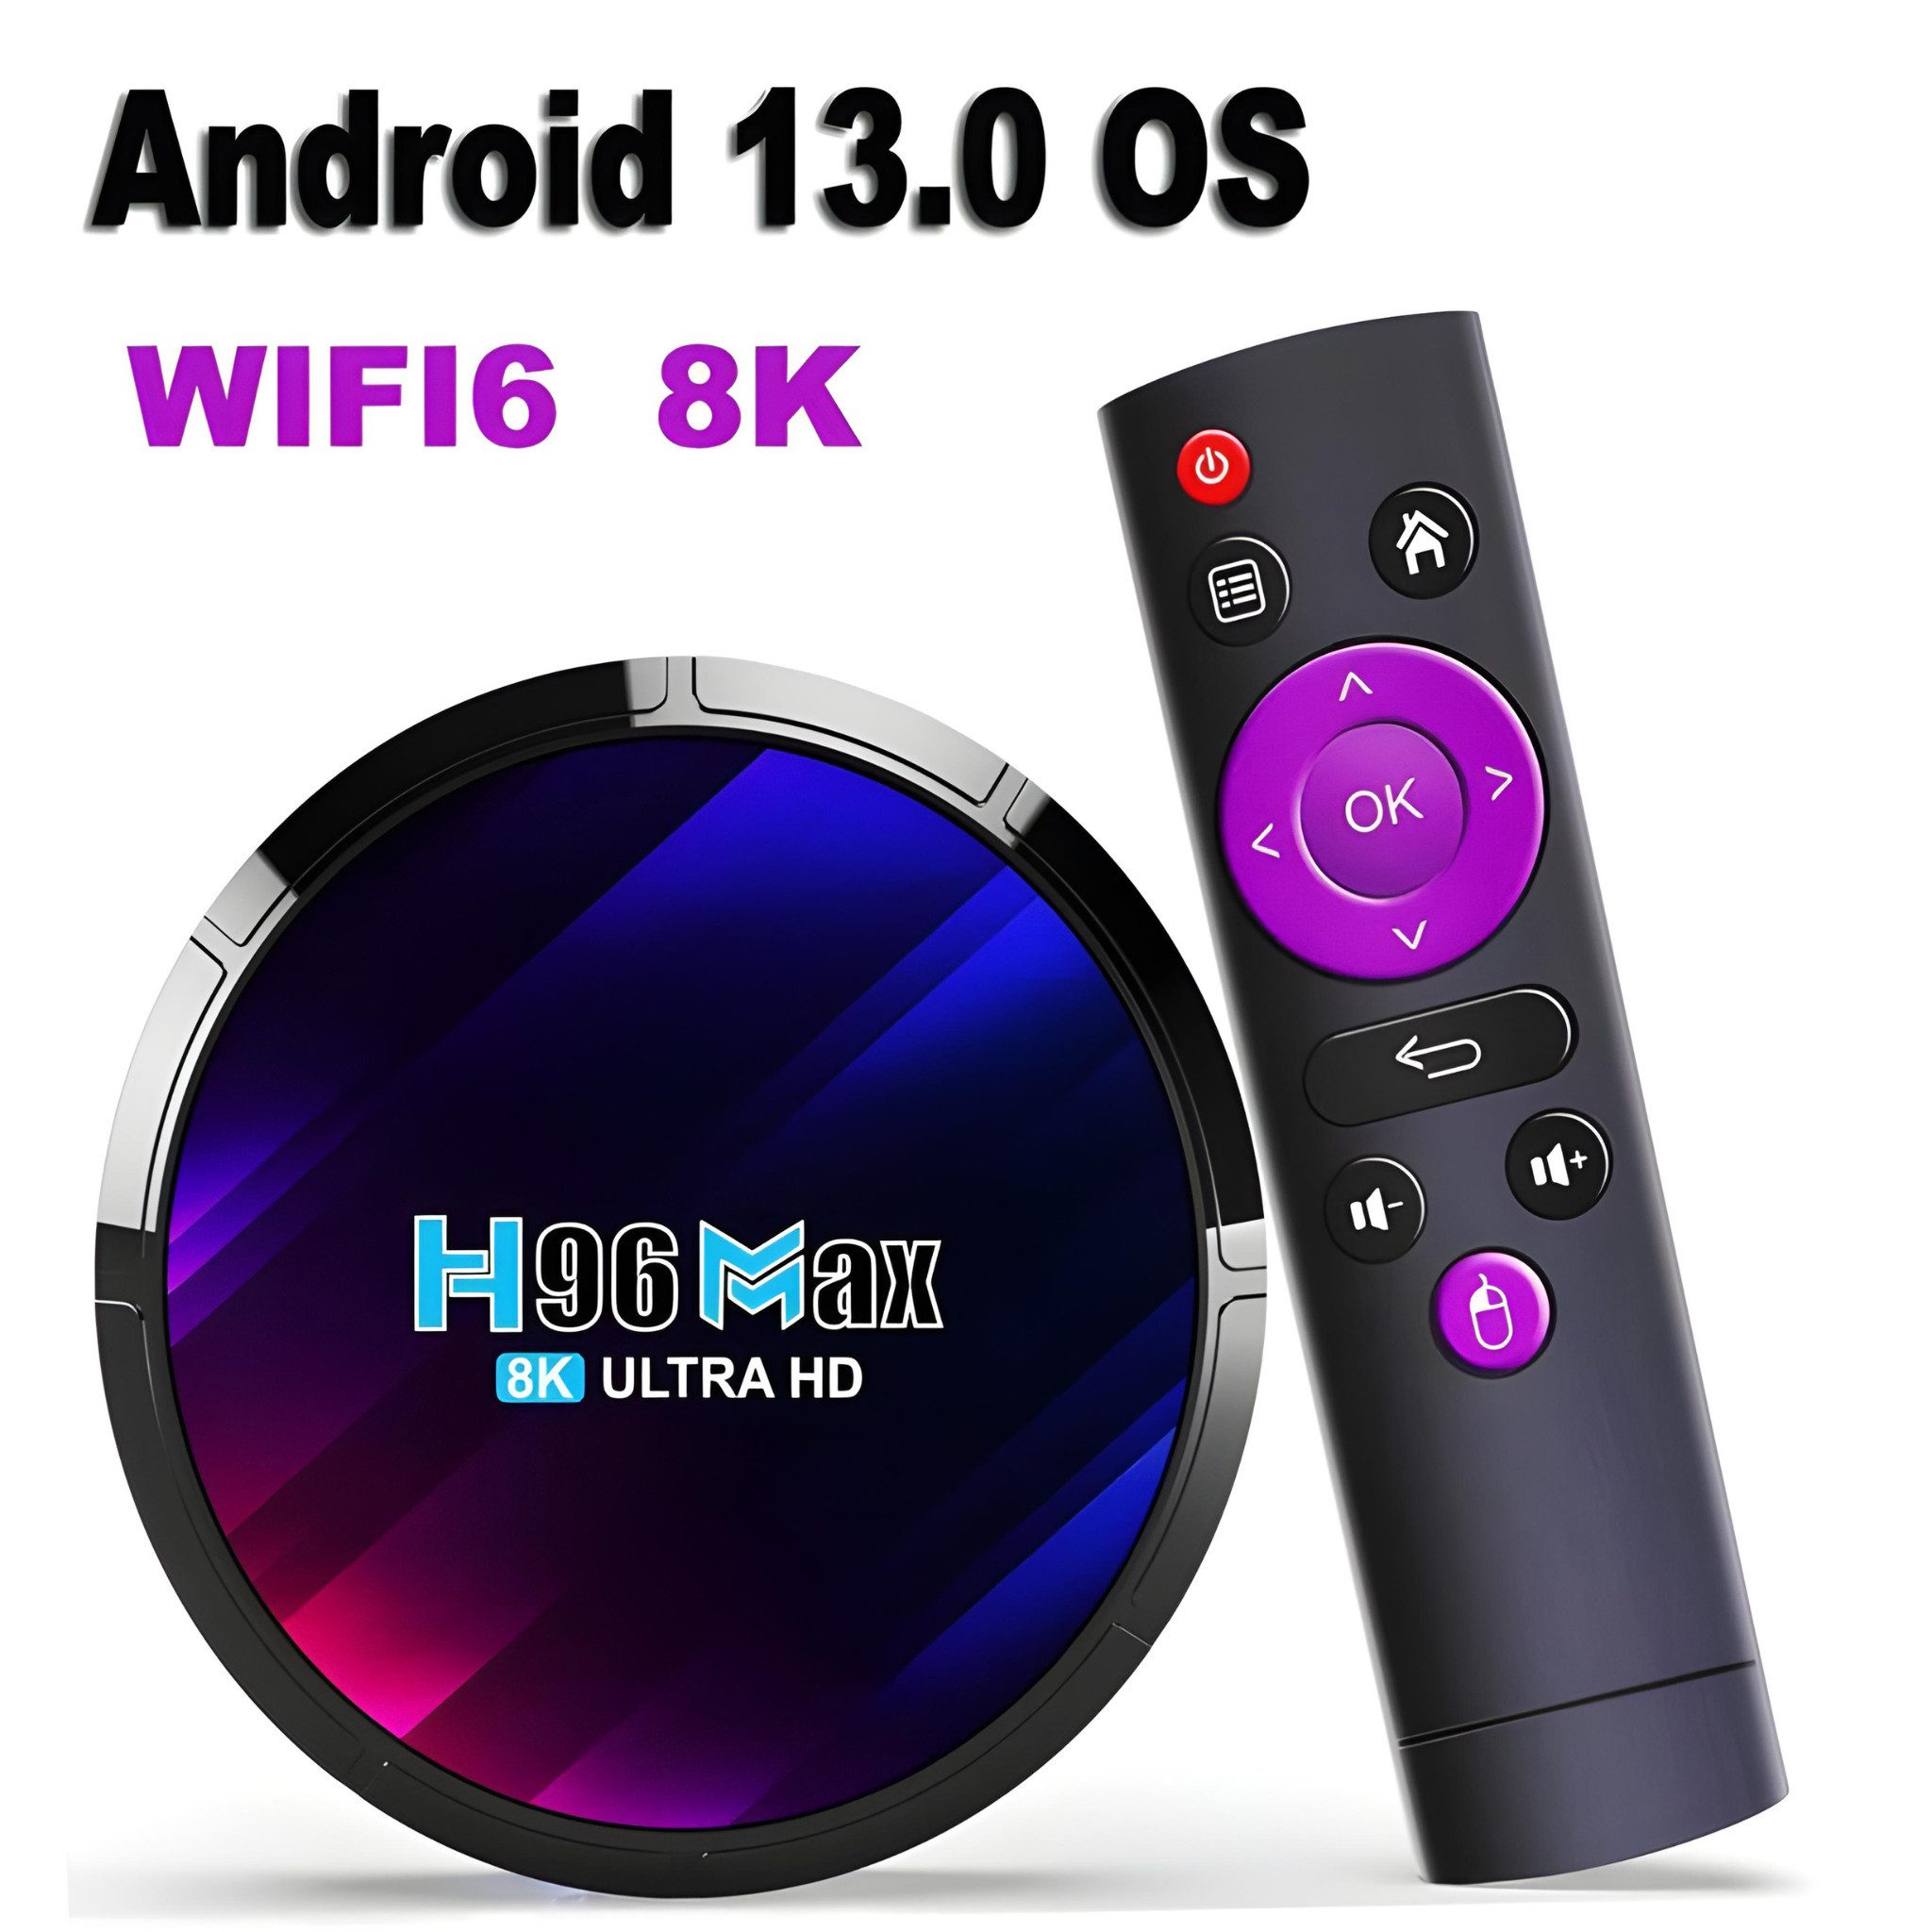 Magcubic Streaming-Stick 8K Android Wifi Smart TV Box Ultra HD WiFi Media Player, Android Smart TV mit Netflix, Youtube, Amazon Prime Video etc.